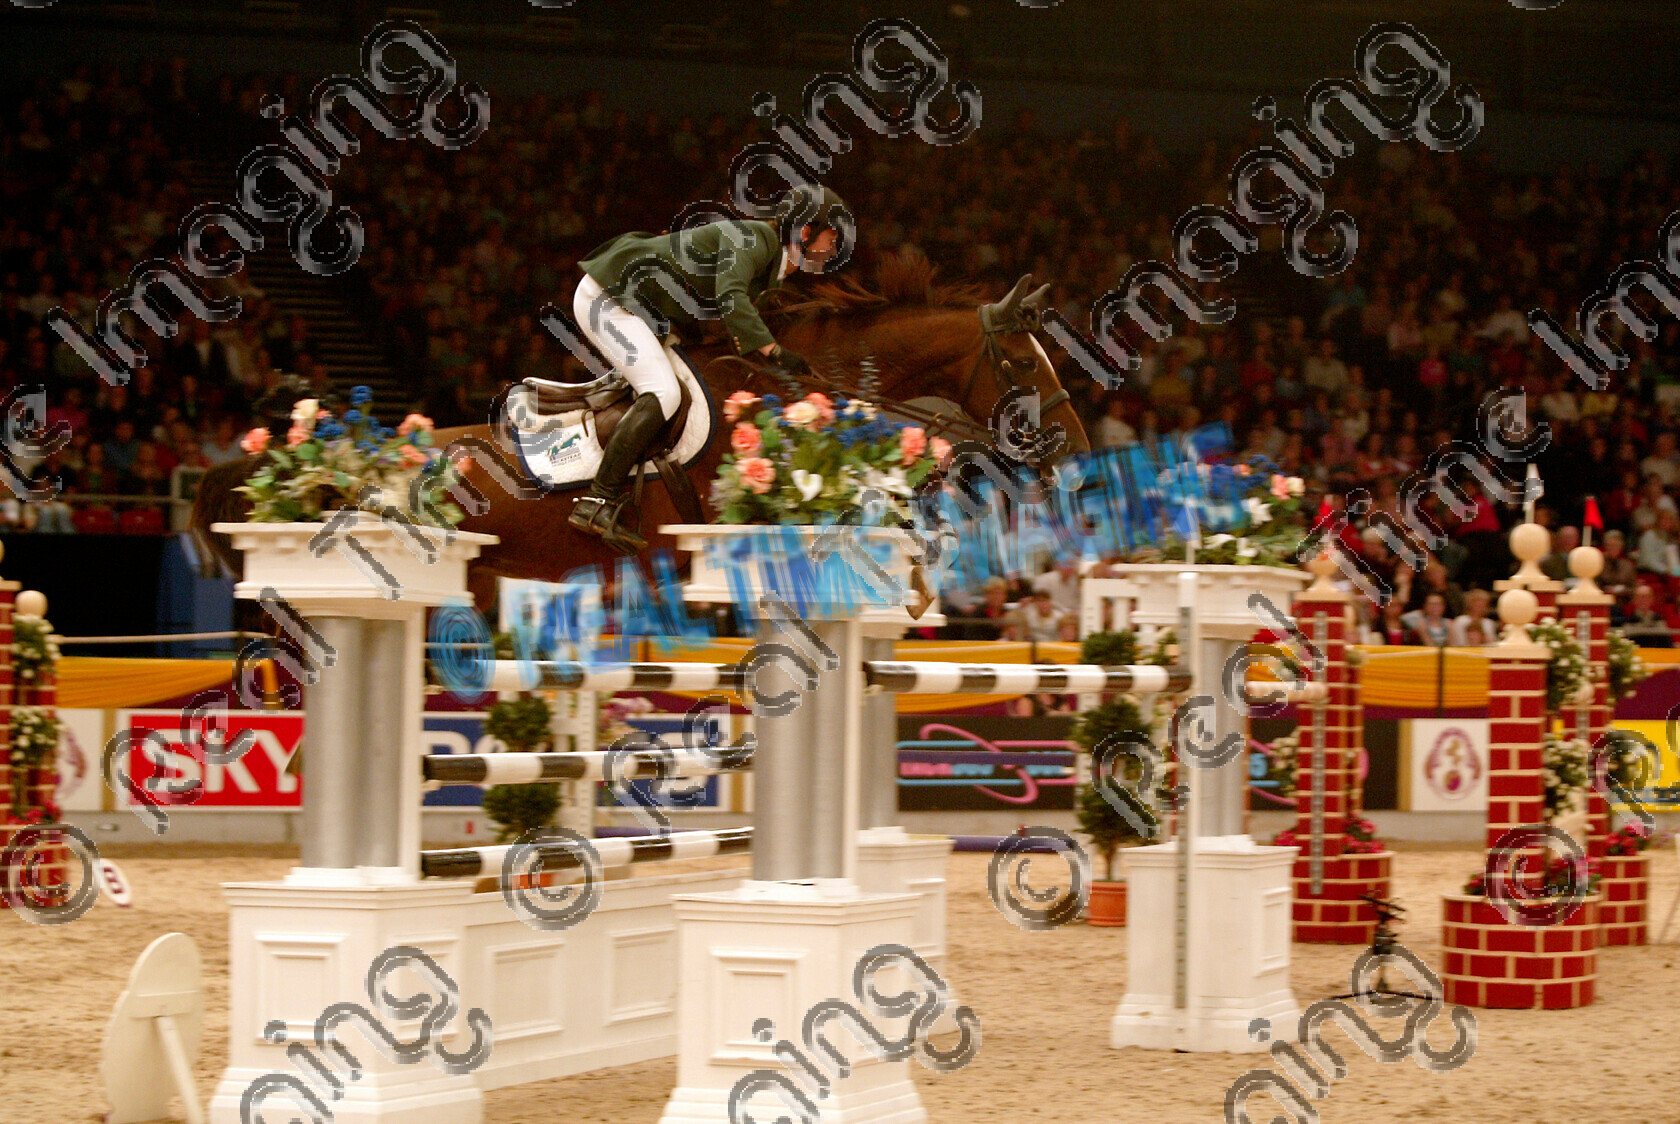 S05-67-T7-043 
 HOYS 2005: The Zinc Management Cup winner 
 Keywords: horse of the year show 2005 05 hoys saturday 15 10 october 21 Zinc Management Cup winner 95 Intermission Billy Twomey chestnut mare jump jumping fence action showjumping showjumper